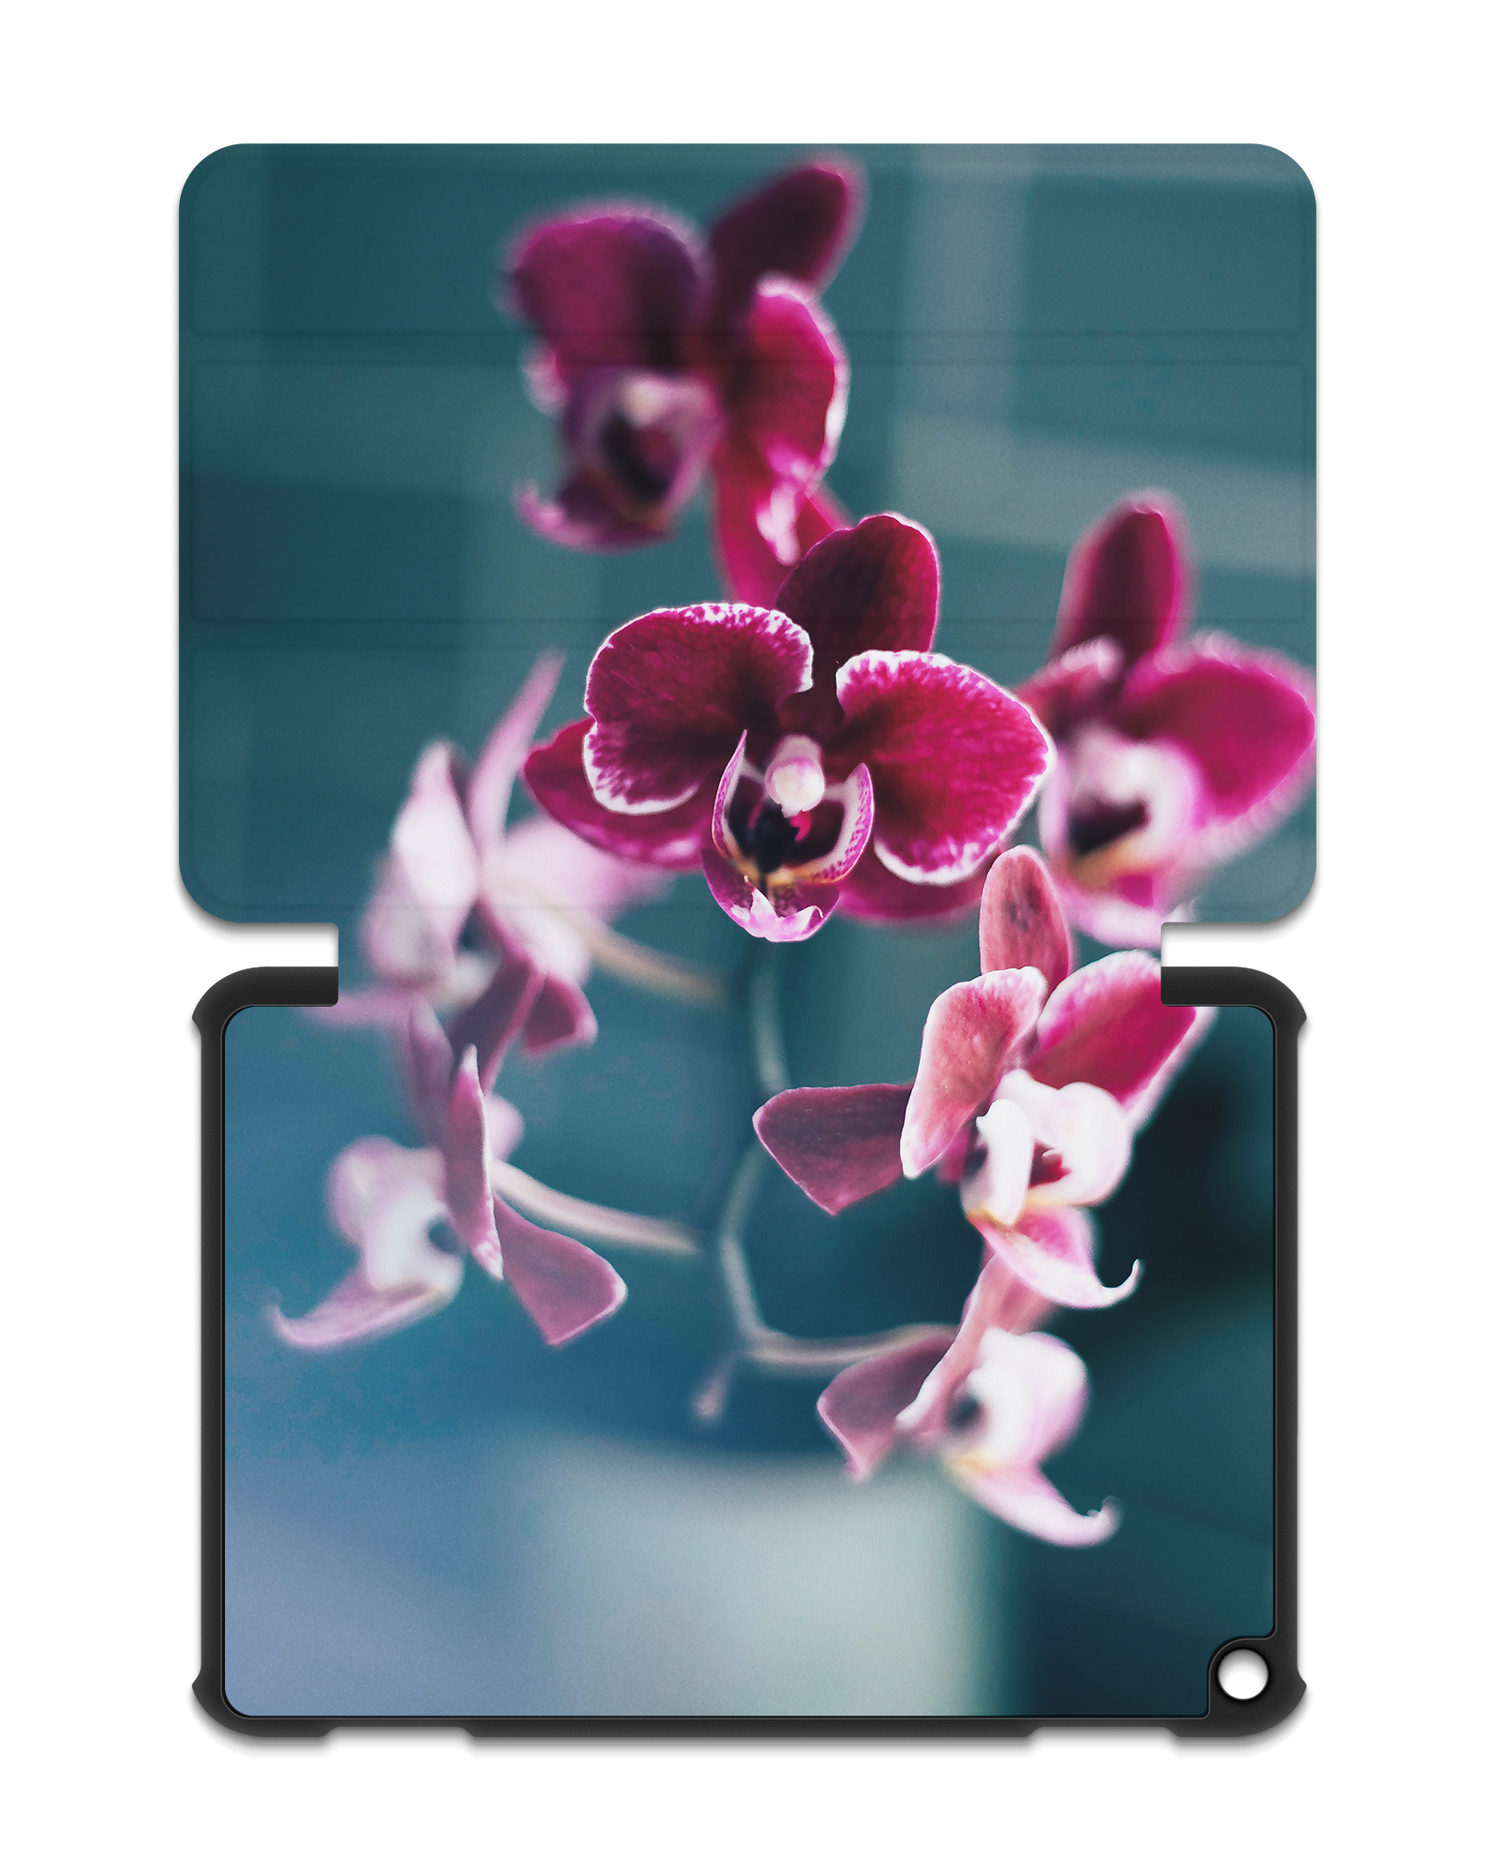 Orchid Tablet Smart Case for Amazon Fire HD 8 (2022), Amazon Fire HD 8 Plus (2022), Amazon Fire HD 8 (2020), Amazon Fire HD 8 Plus (2020): Opened